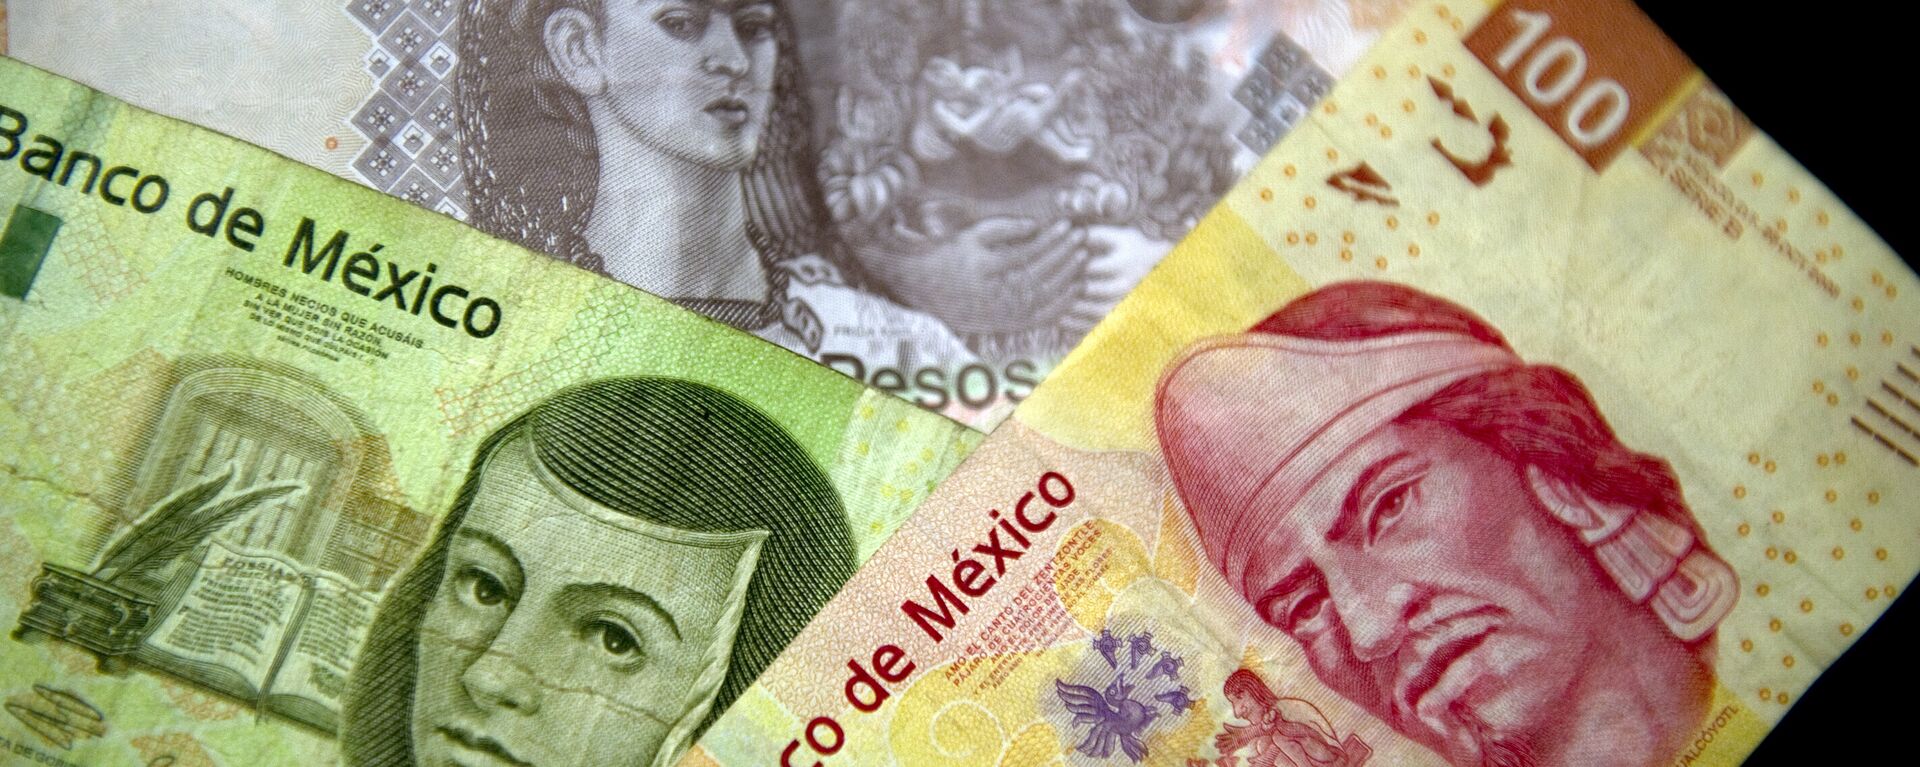 Picture of Mexican Peso notes of different denominations taken on December 27, 2011 in Mexico City - Sputnik Mundo, 1920, 03.05.2021